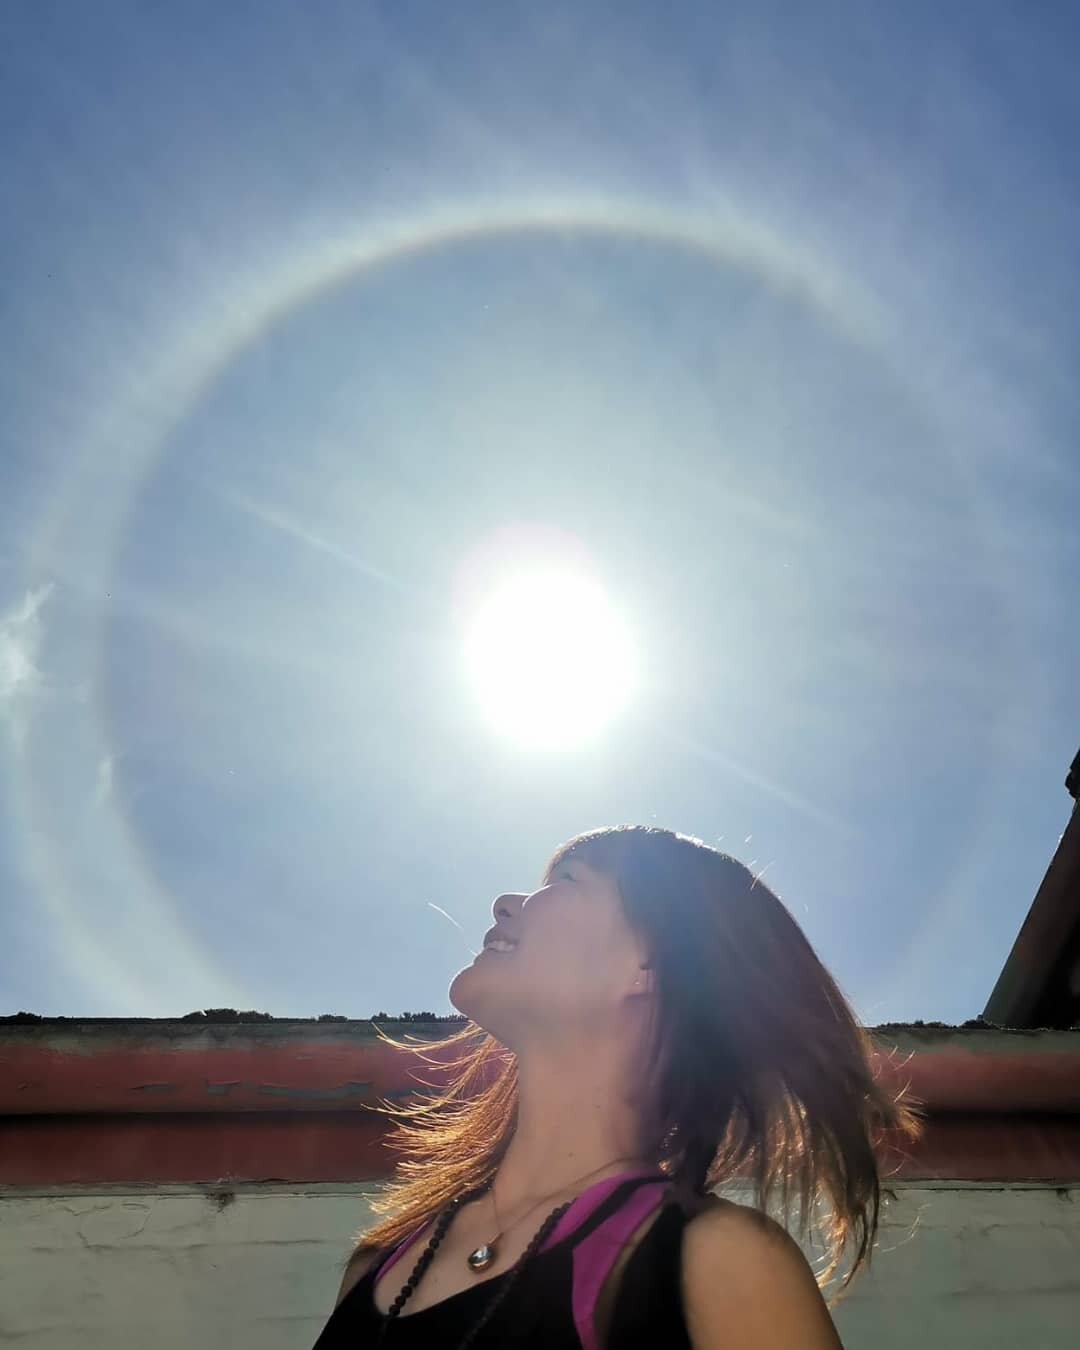 Have you seen this 22'c Halo around the sun mid-day ISH in Exeter U.K? This is the original photo, no filter. So lucky be able to see it with my naked eye. &quot;We live on a blue plant that circles around a ball of fire next to a moon that moves the